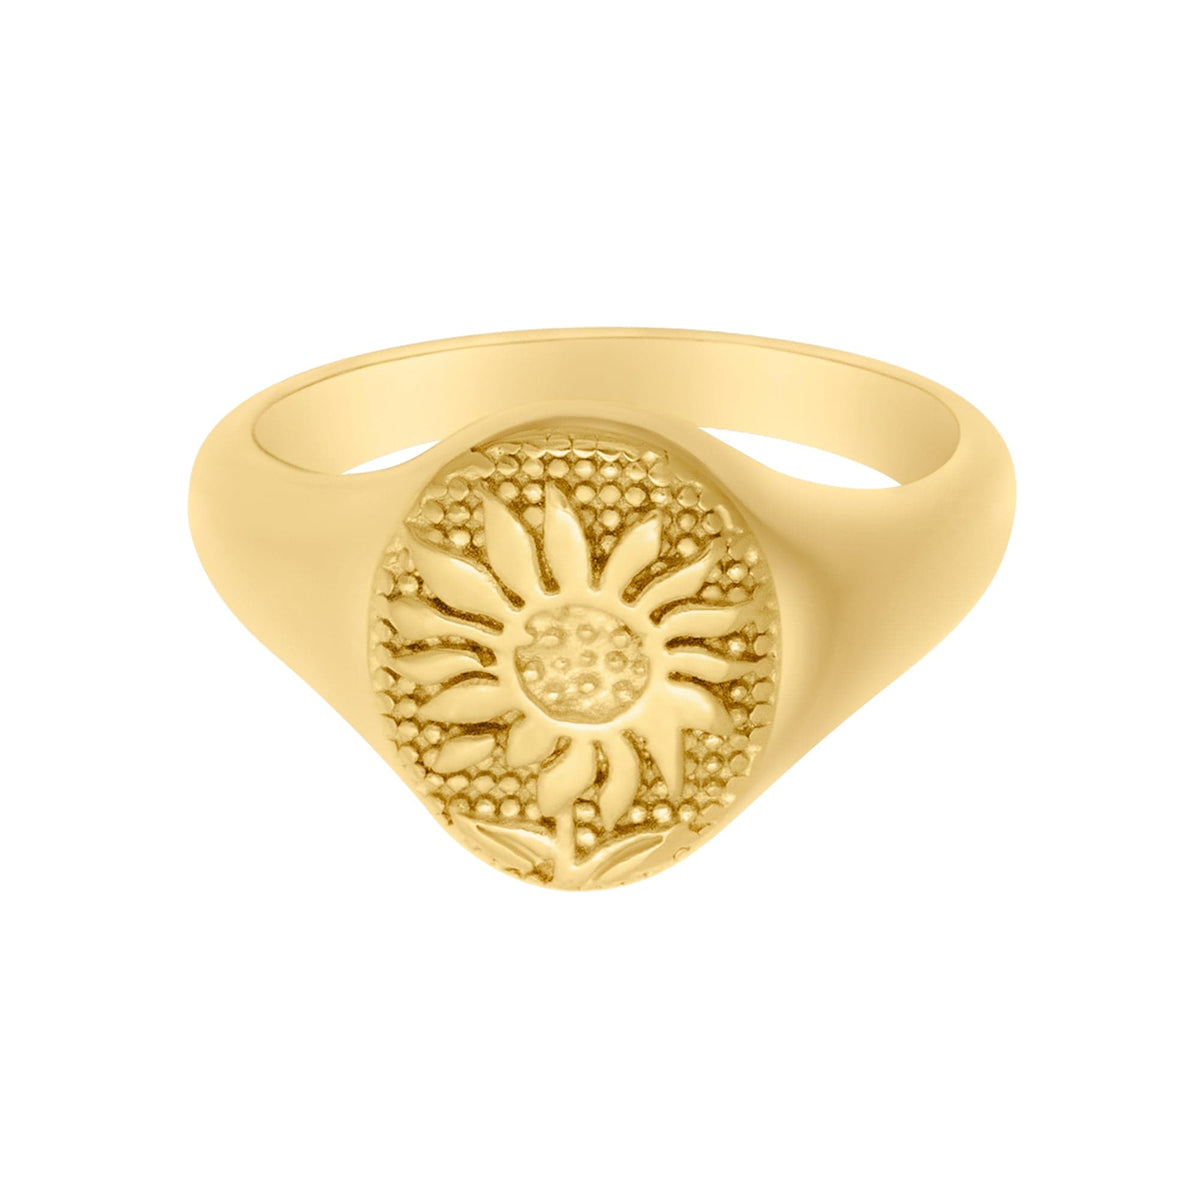 BohoMoon Stainless Steel Alicante Signet Ring Gold / US 6 / UK L / EUR 51 (small)